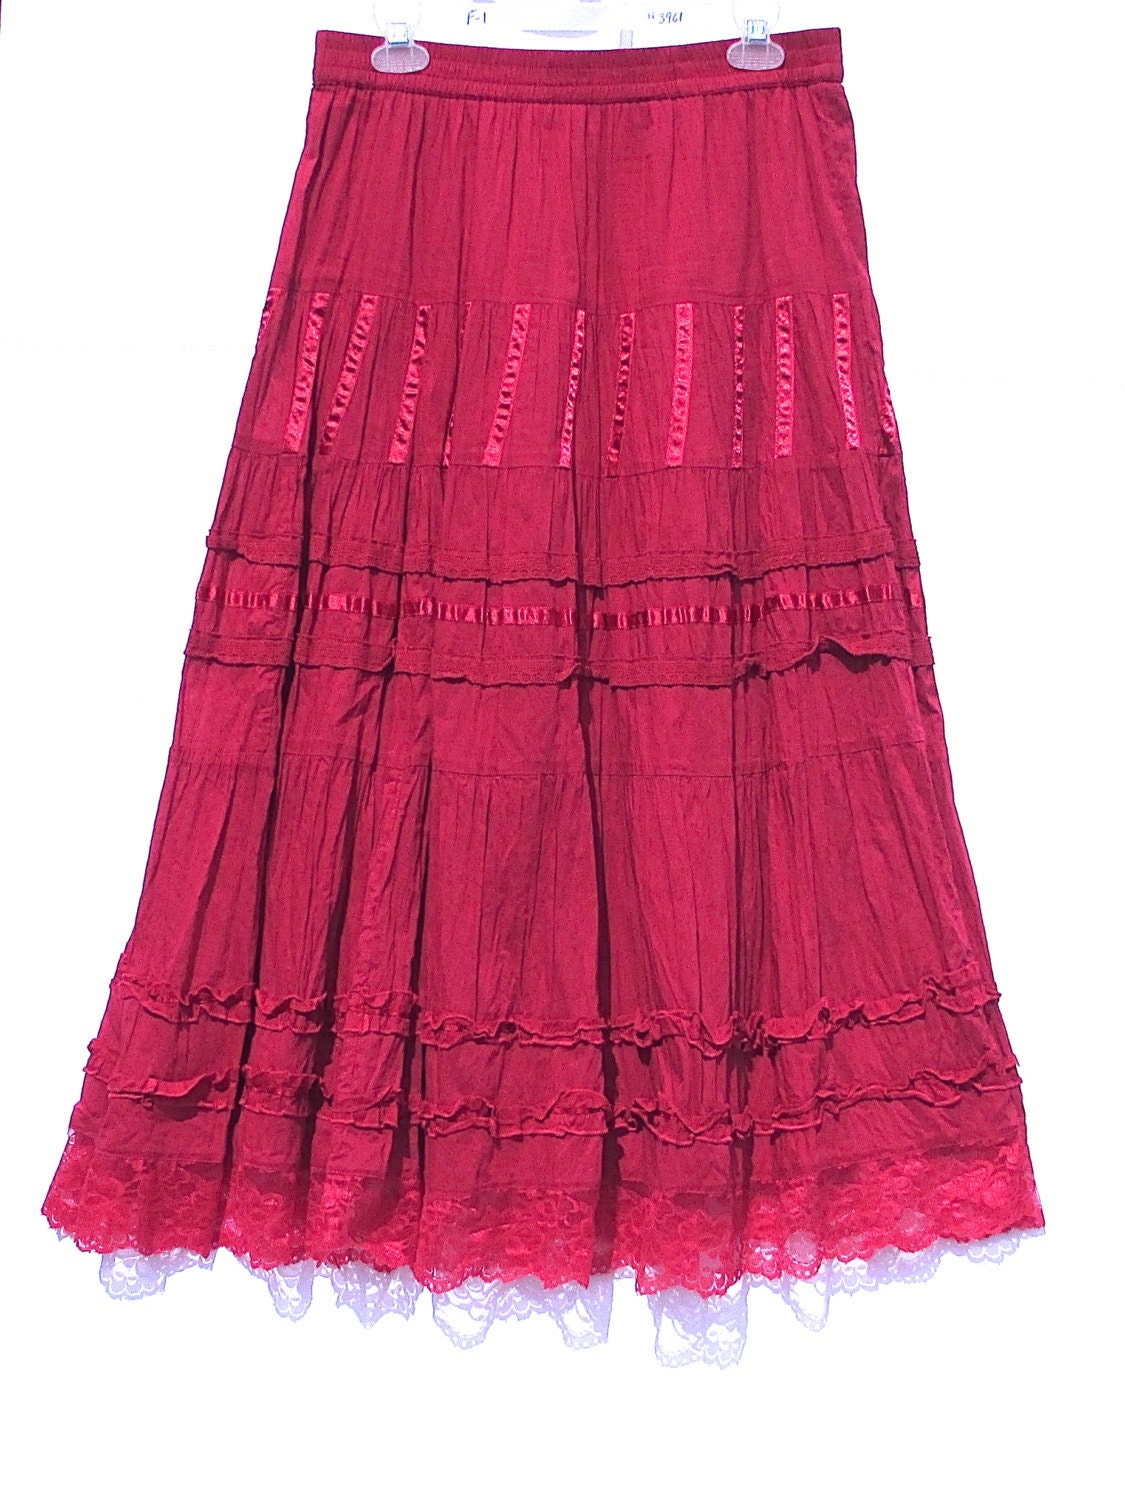 Tiered Broomstick Skirt Red Ruffles Ribbon Lace Size Medium